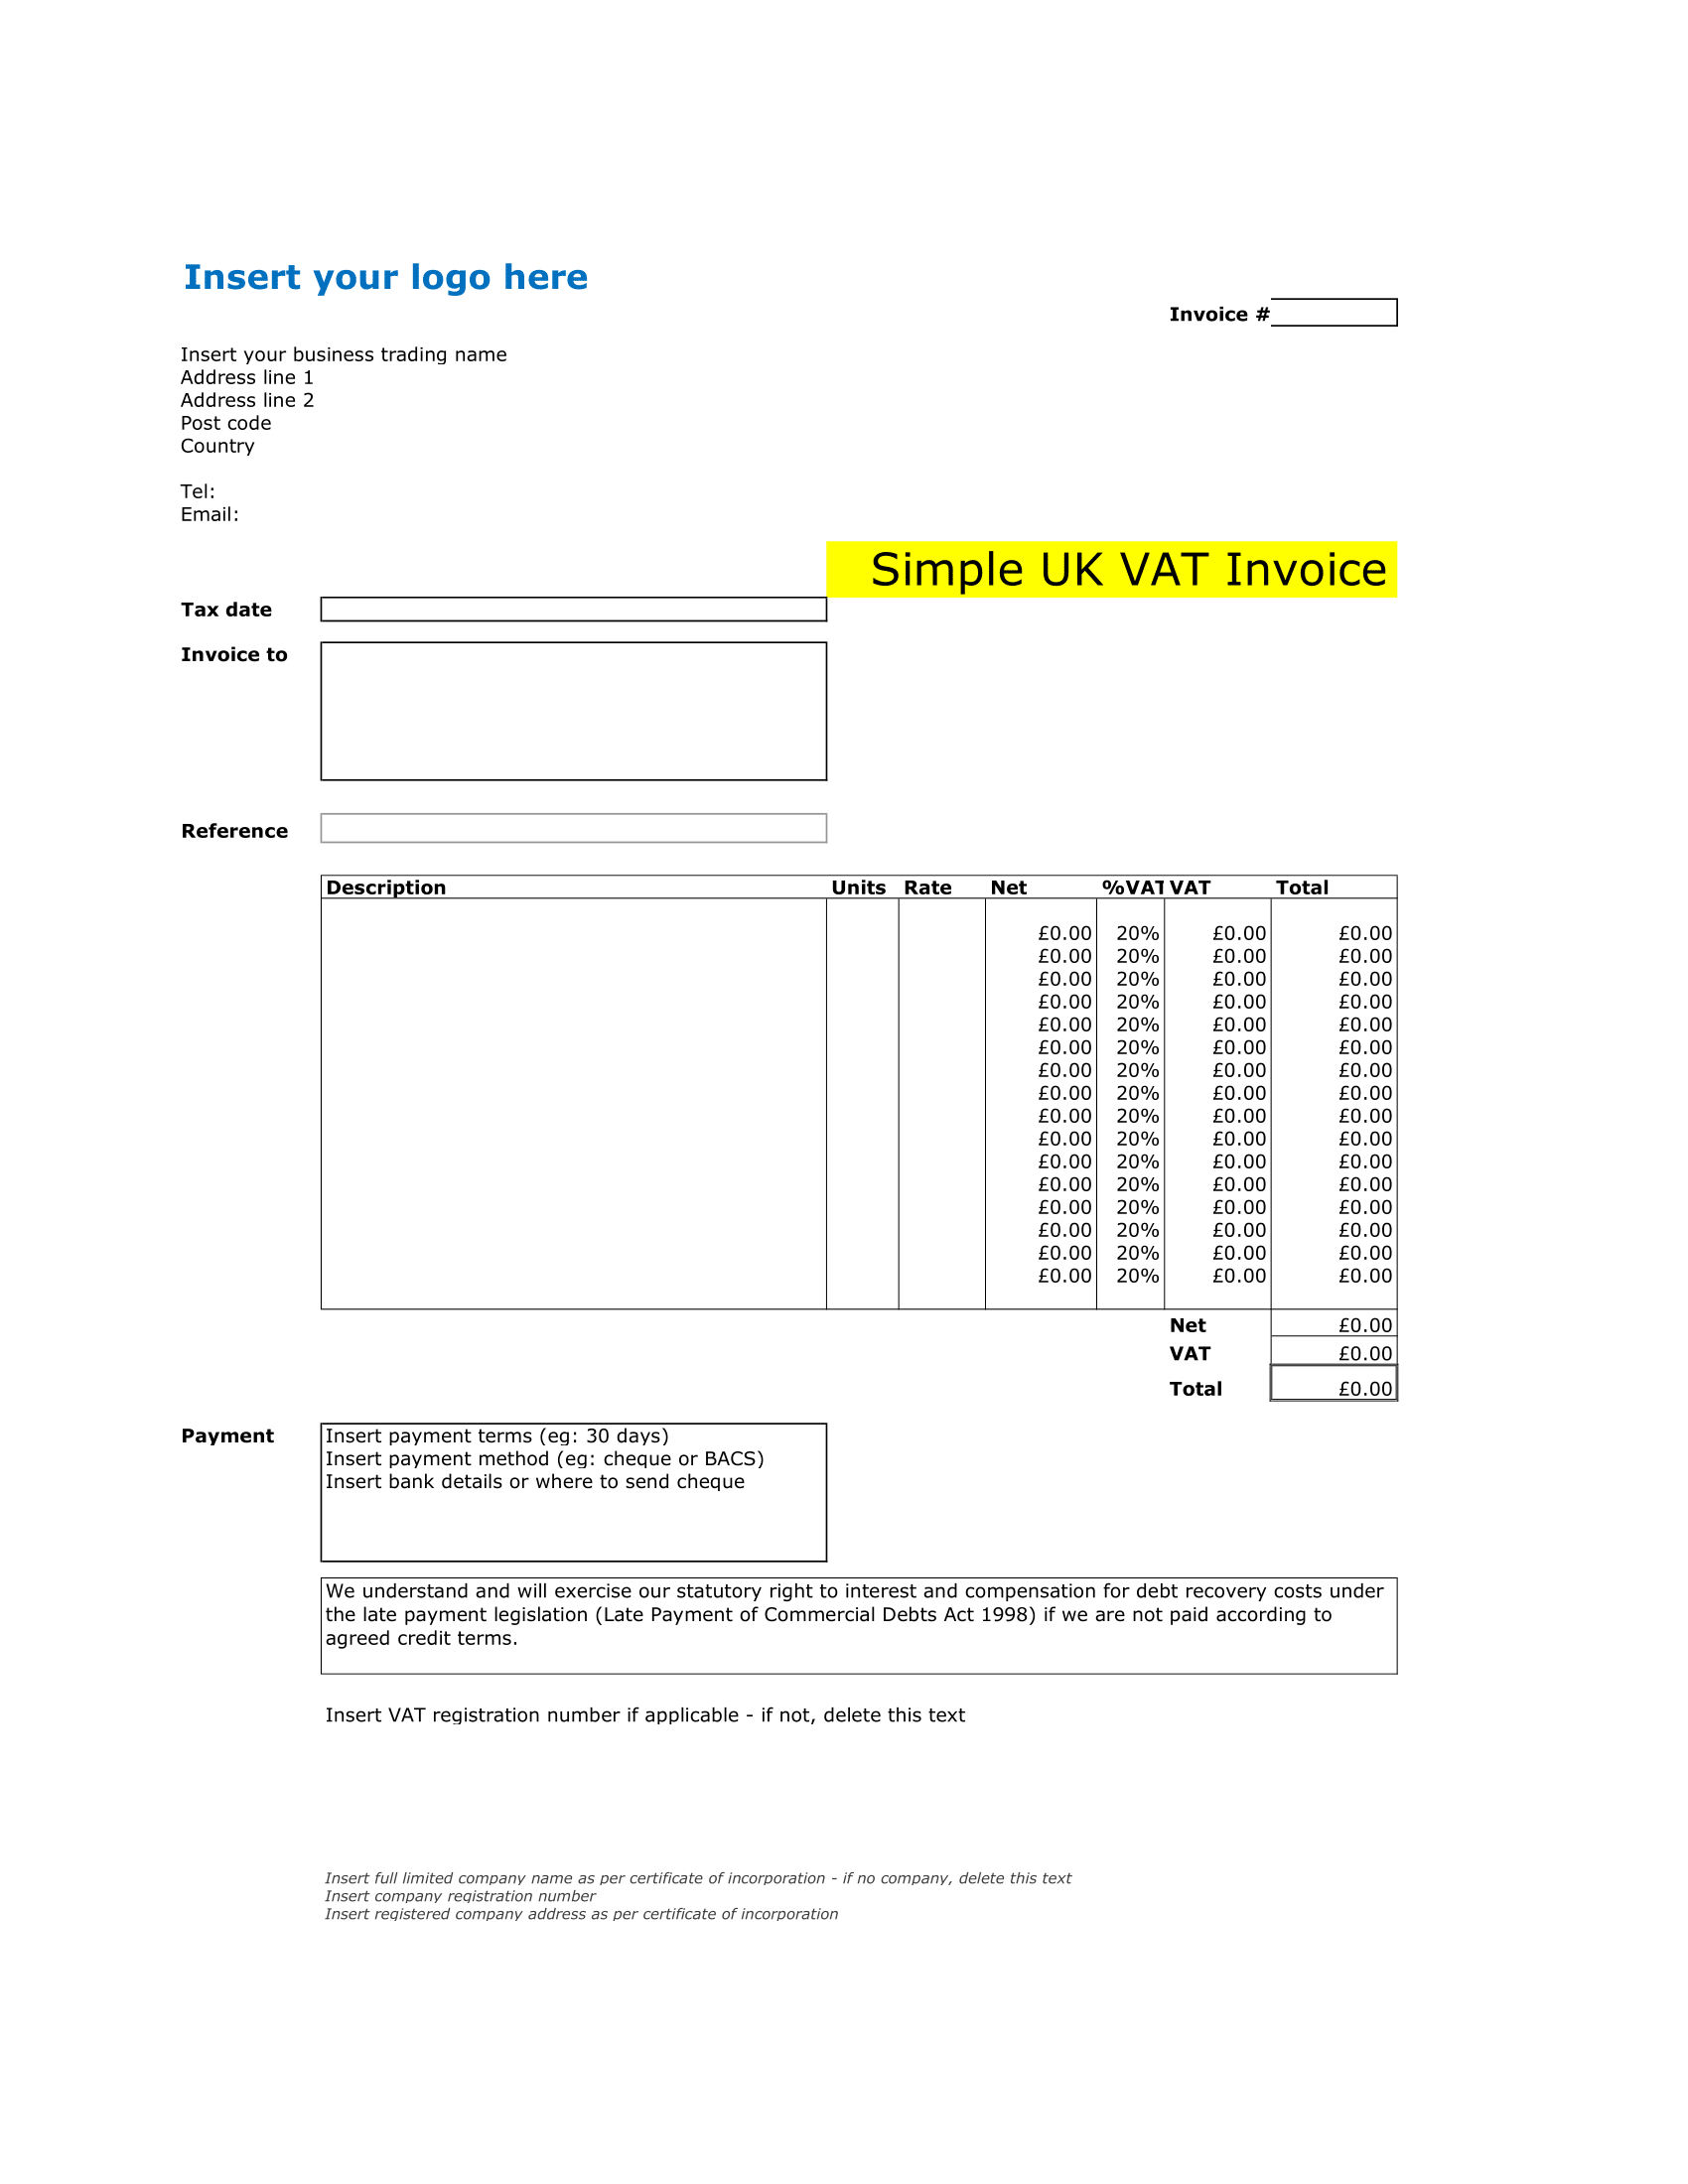 simple UK VAT Invoice Template in Excel, Spreadsheet, Numbers and Google Sheets. Download and start invoicing your customers.